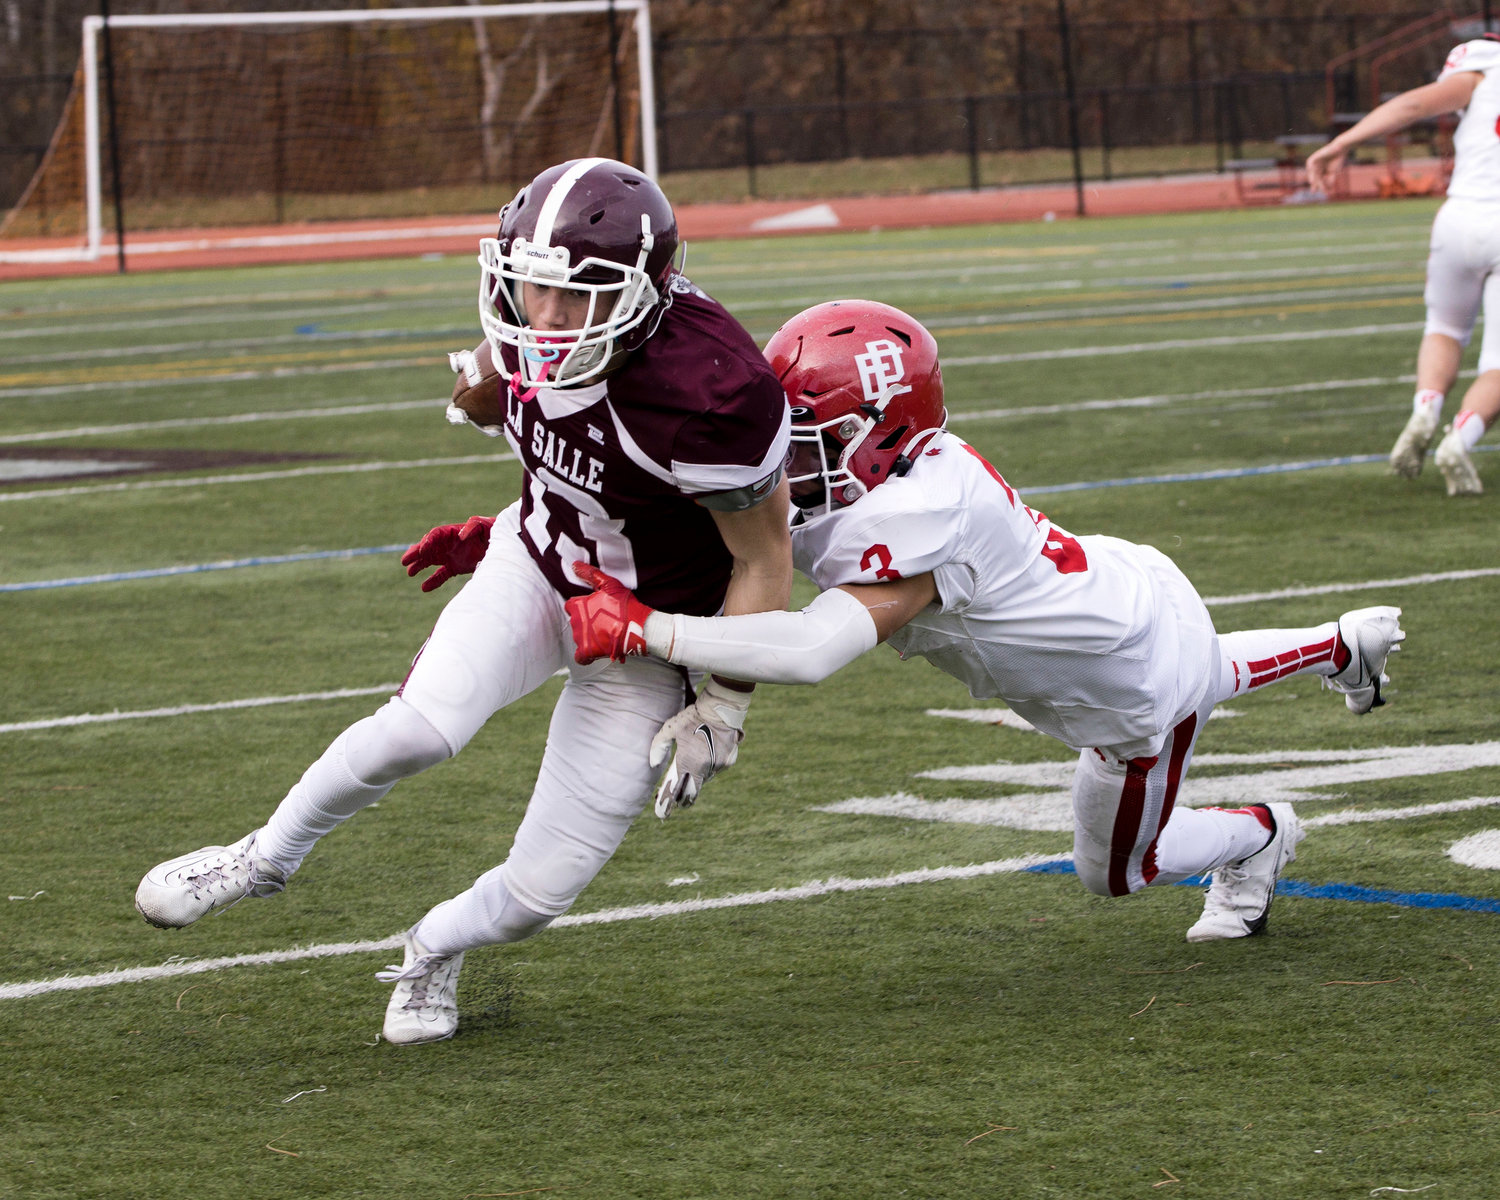 East Providence’s Yusef Abdullah dives toward a LaSalle ball carrier to make a tackle.